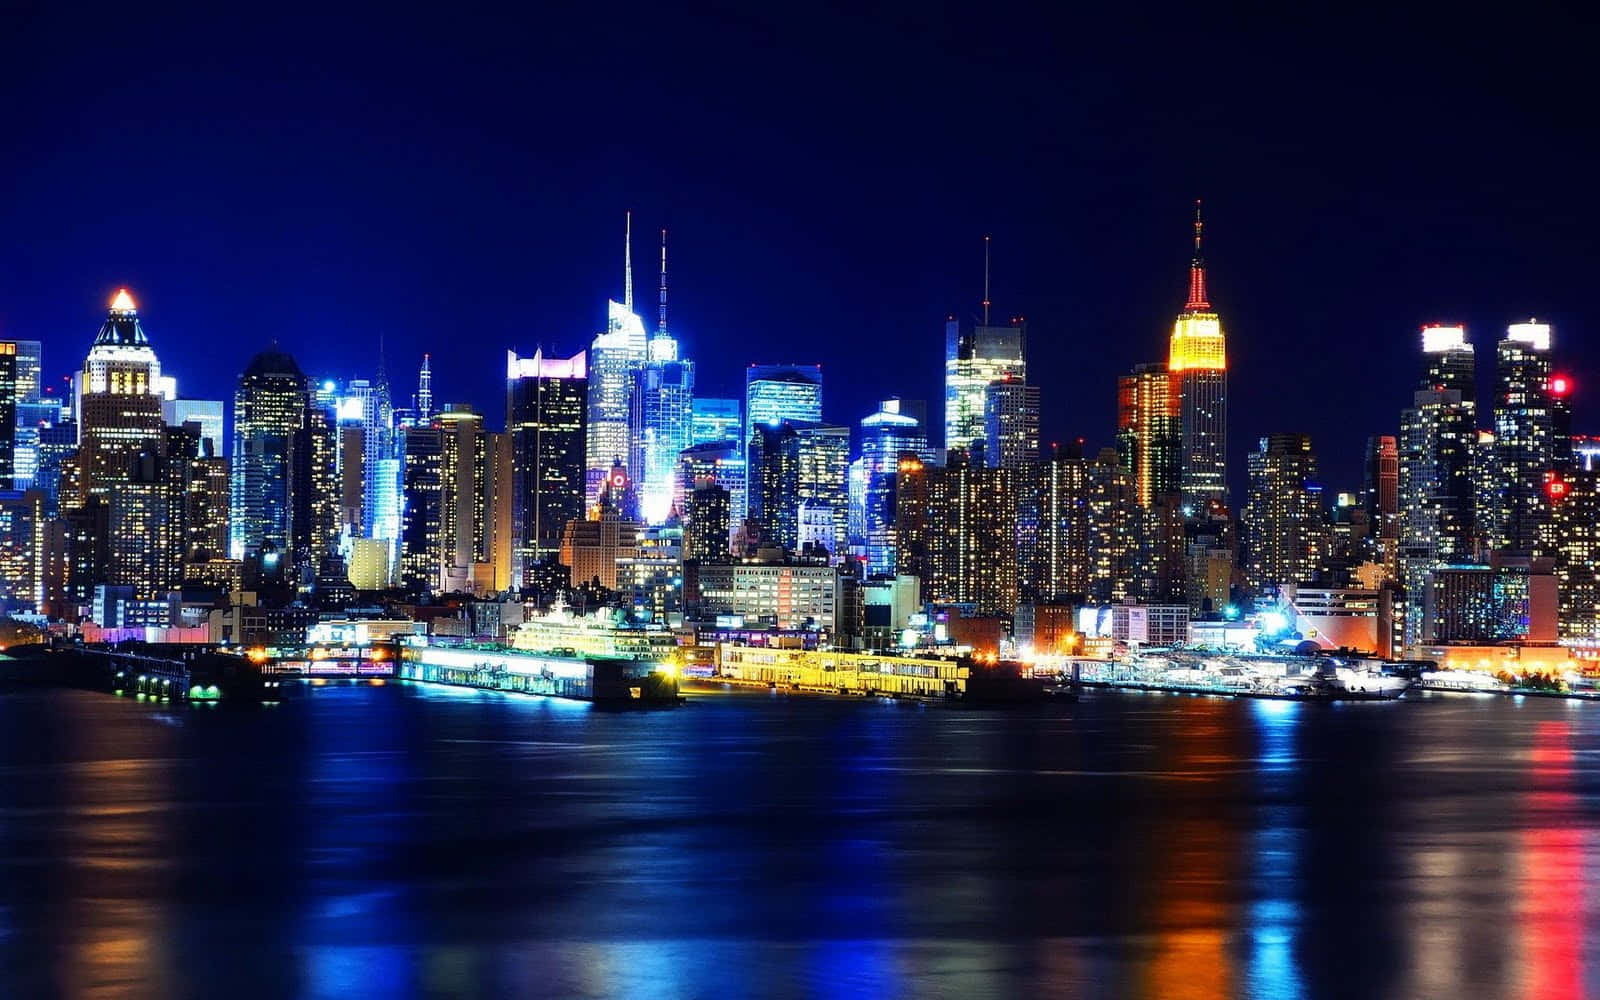 Enjoy a beautiful evening in the city that never sleeps